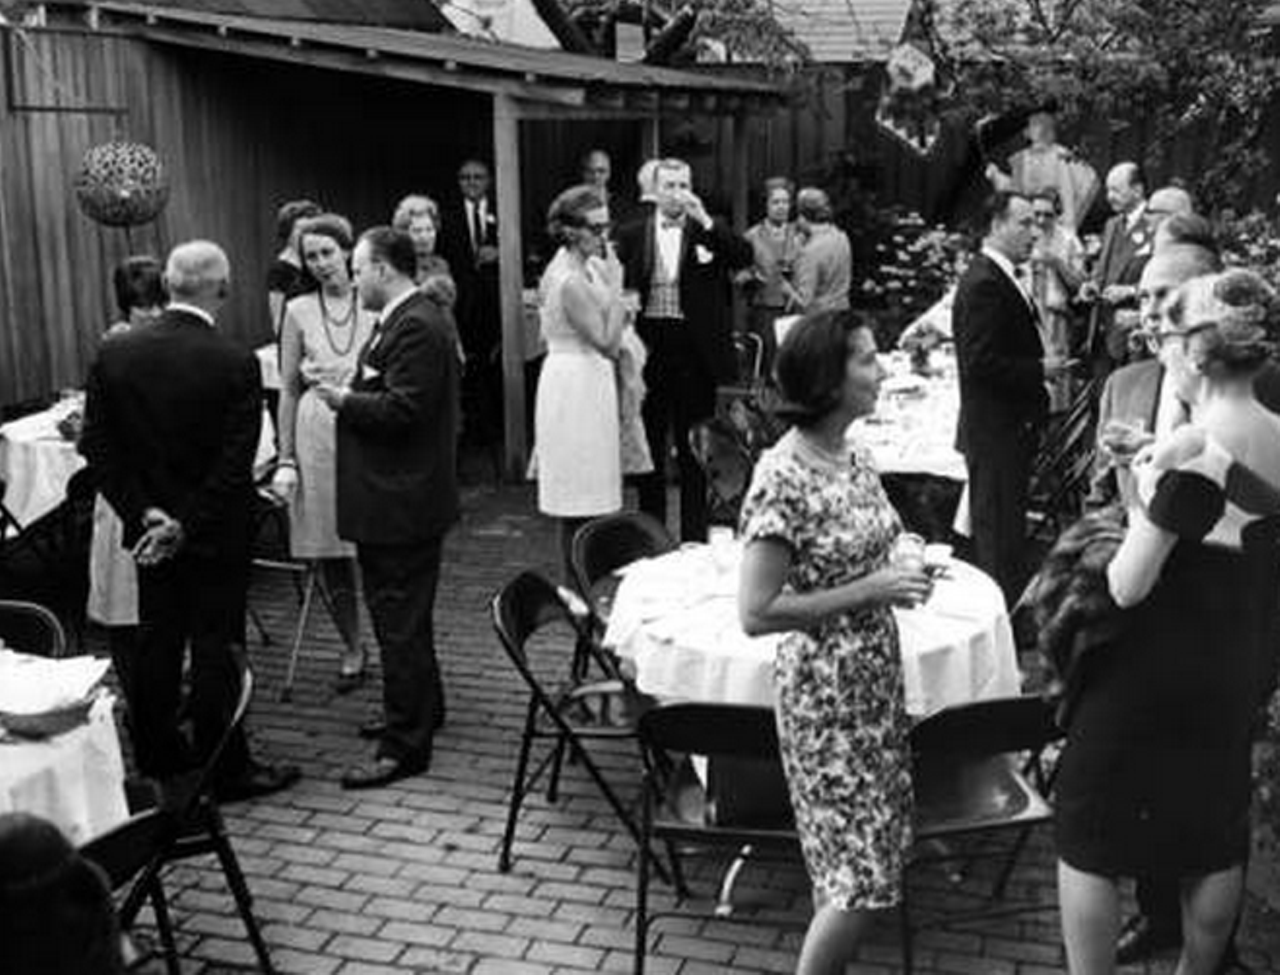 Patrons enjoy a warm evening on the Guarino's patio, 1966.